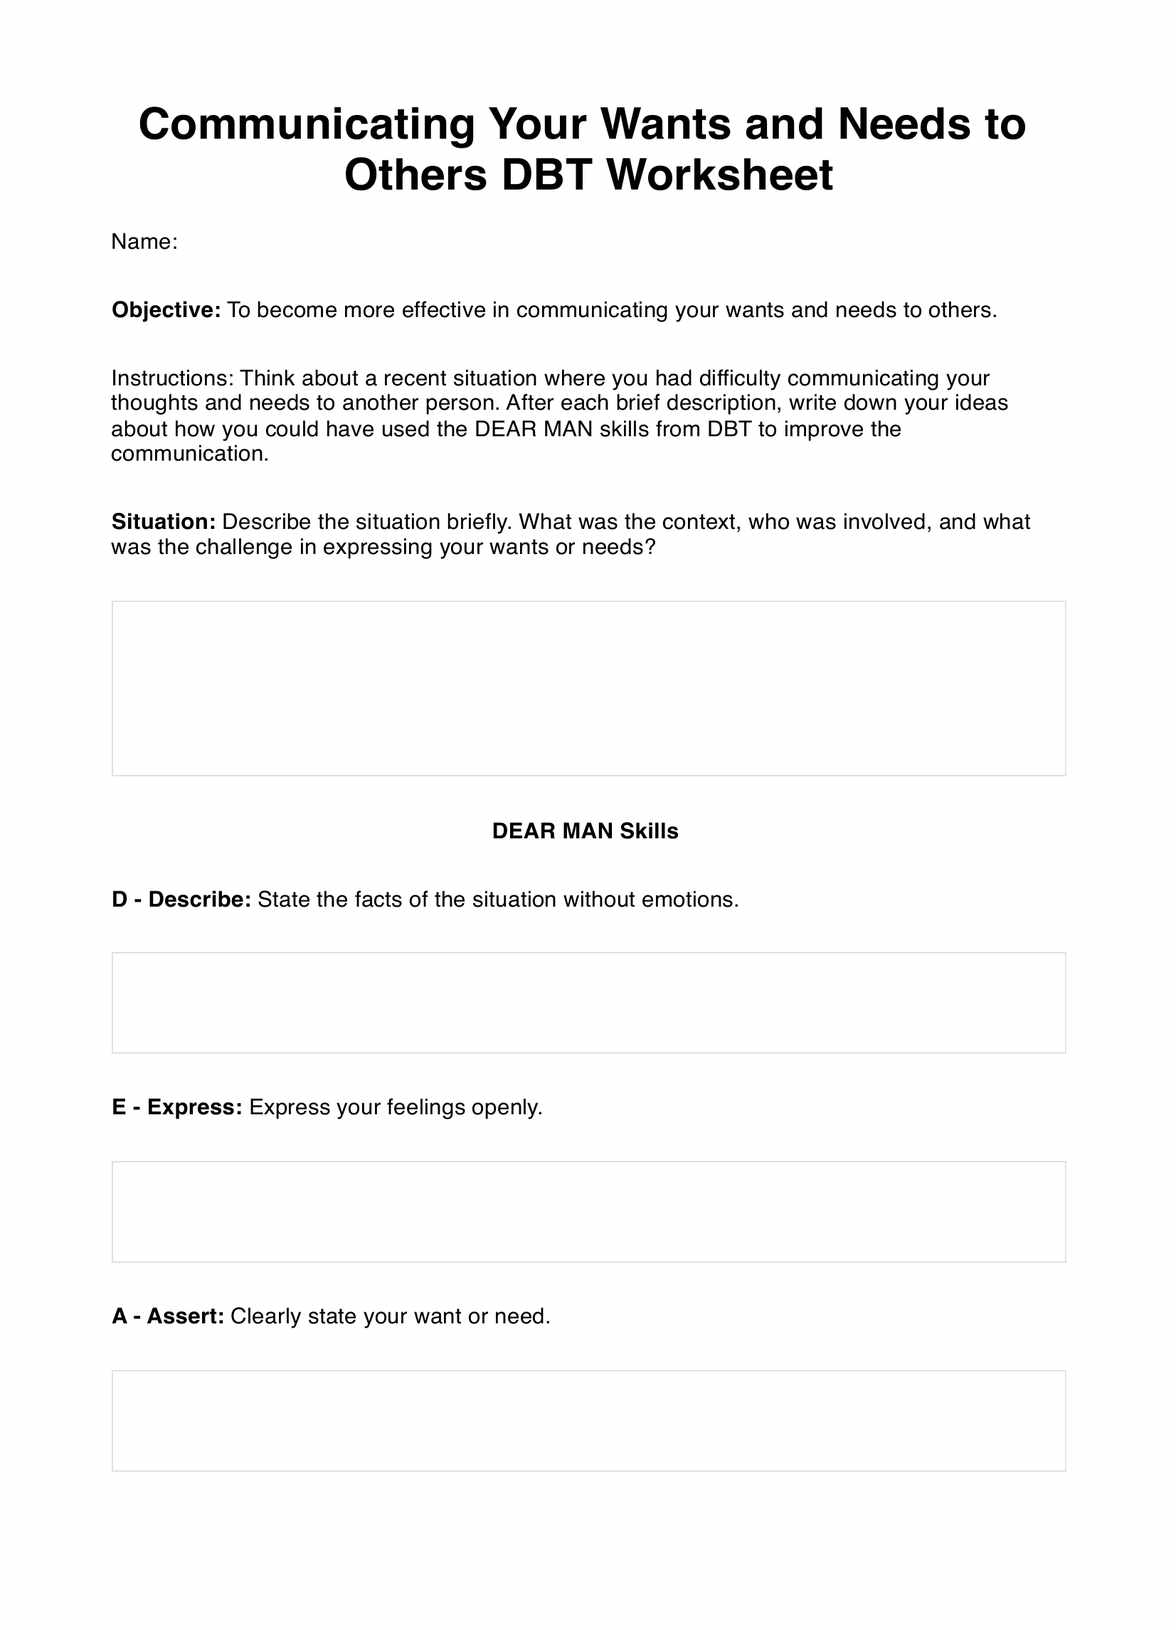 Communicating Your Wants and Needs to Others DBT Worksheet PDF Example